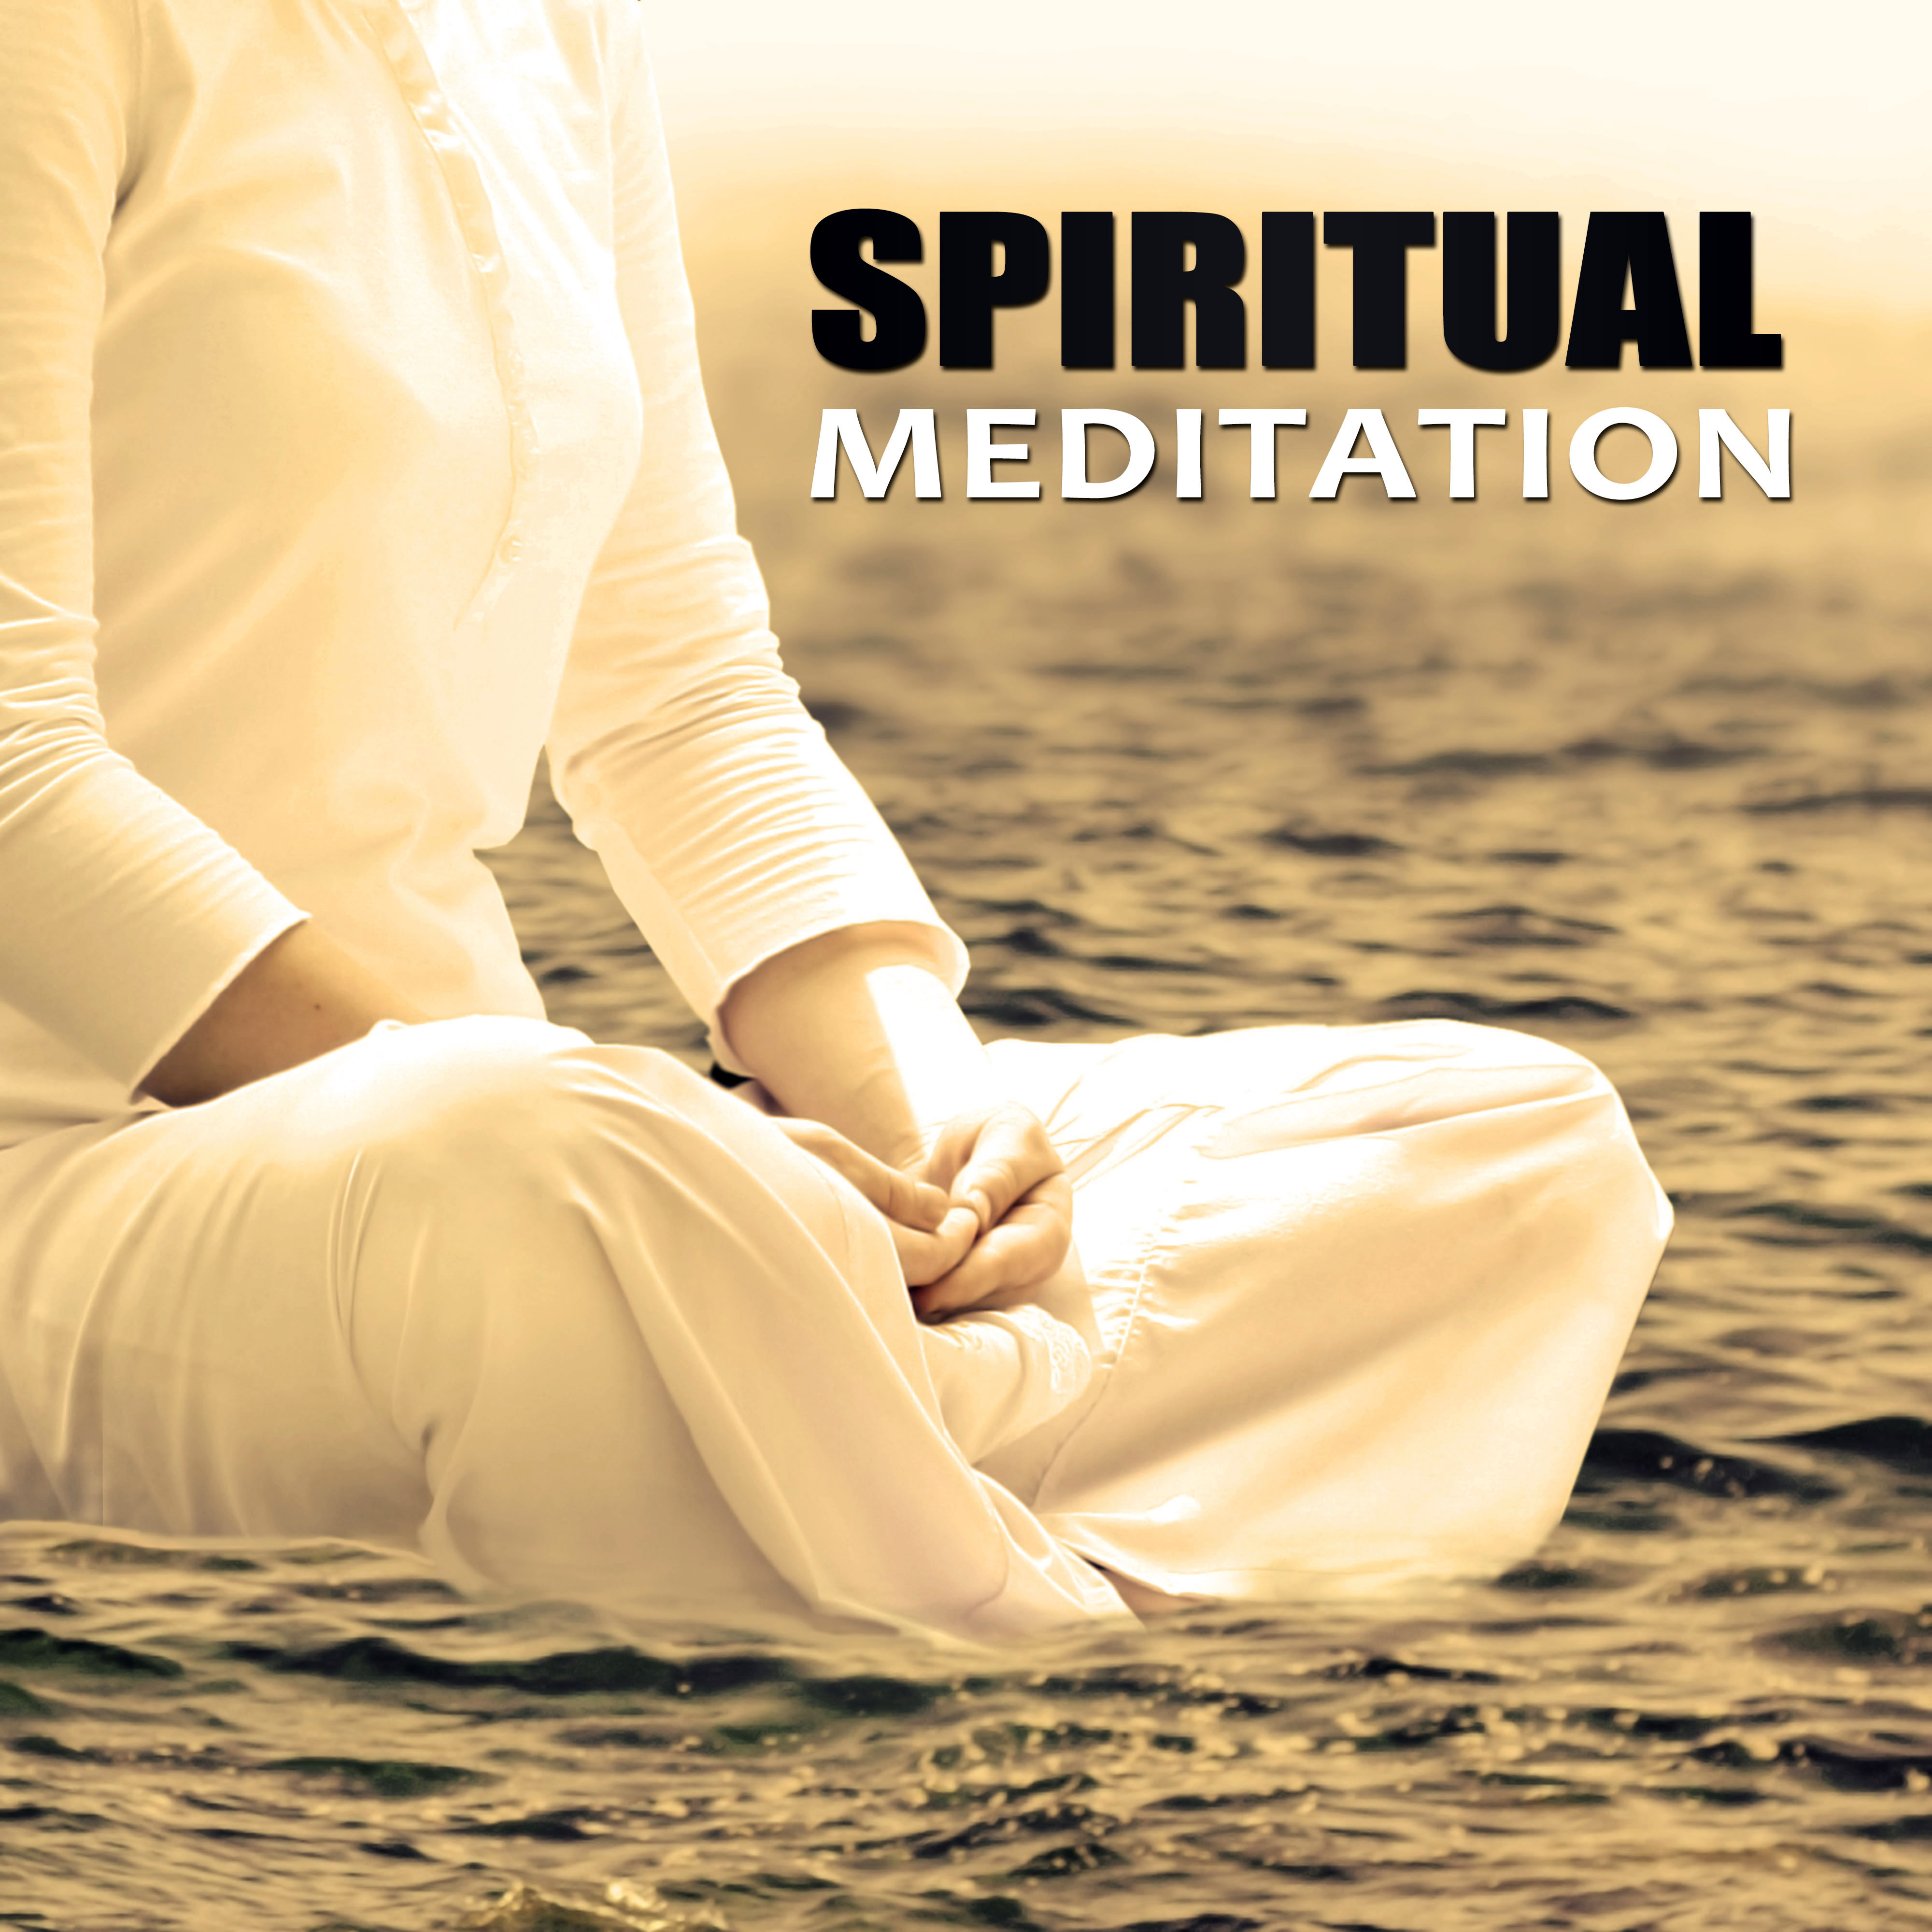 Spiritual Meditation  Pure Meditation, Soothing Sounds, Music Therapy for Relaxation, Restful, Relief, Calm Music for Yoga